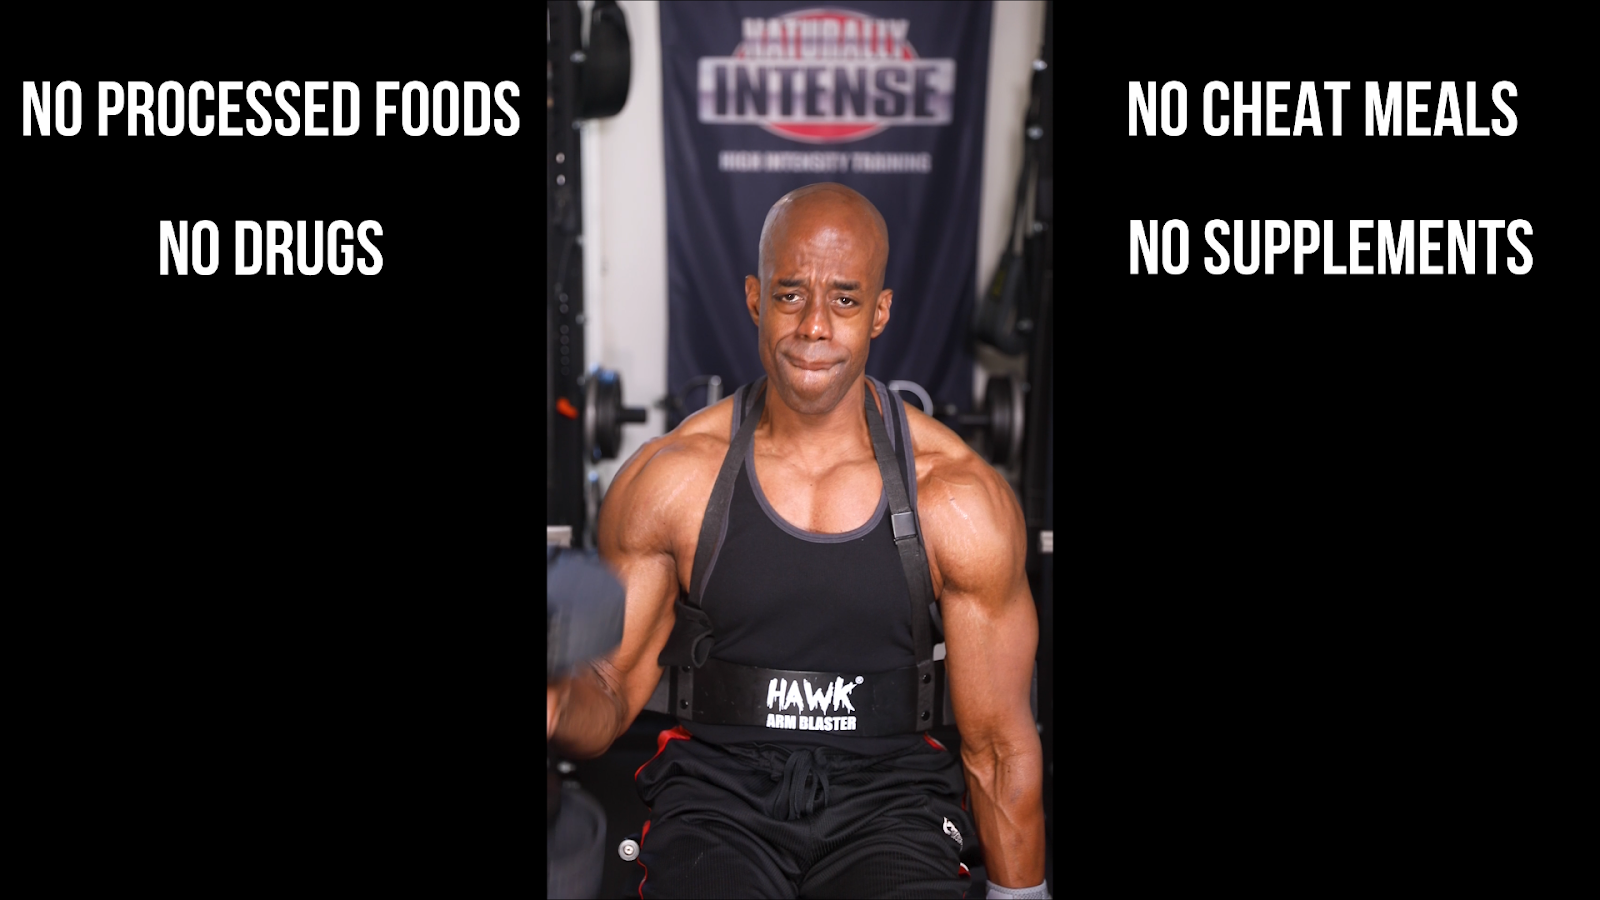 Kevin's high intensity training means no processed foods, cheat meals, drugs, or supplements